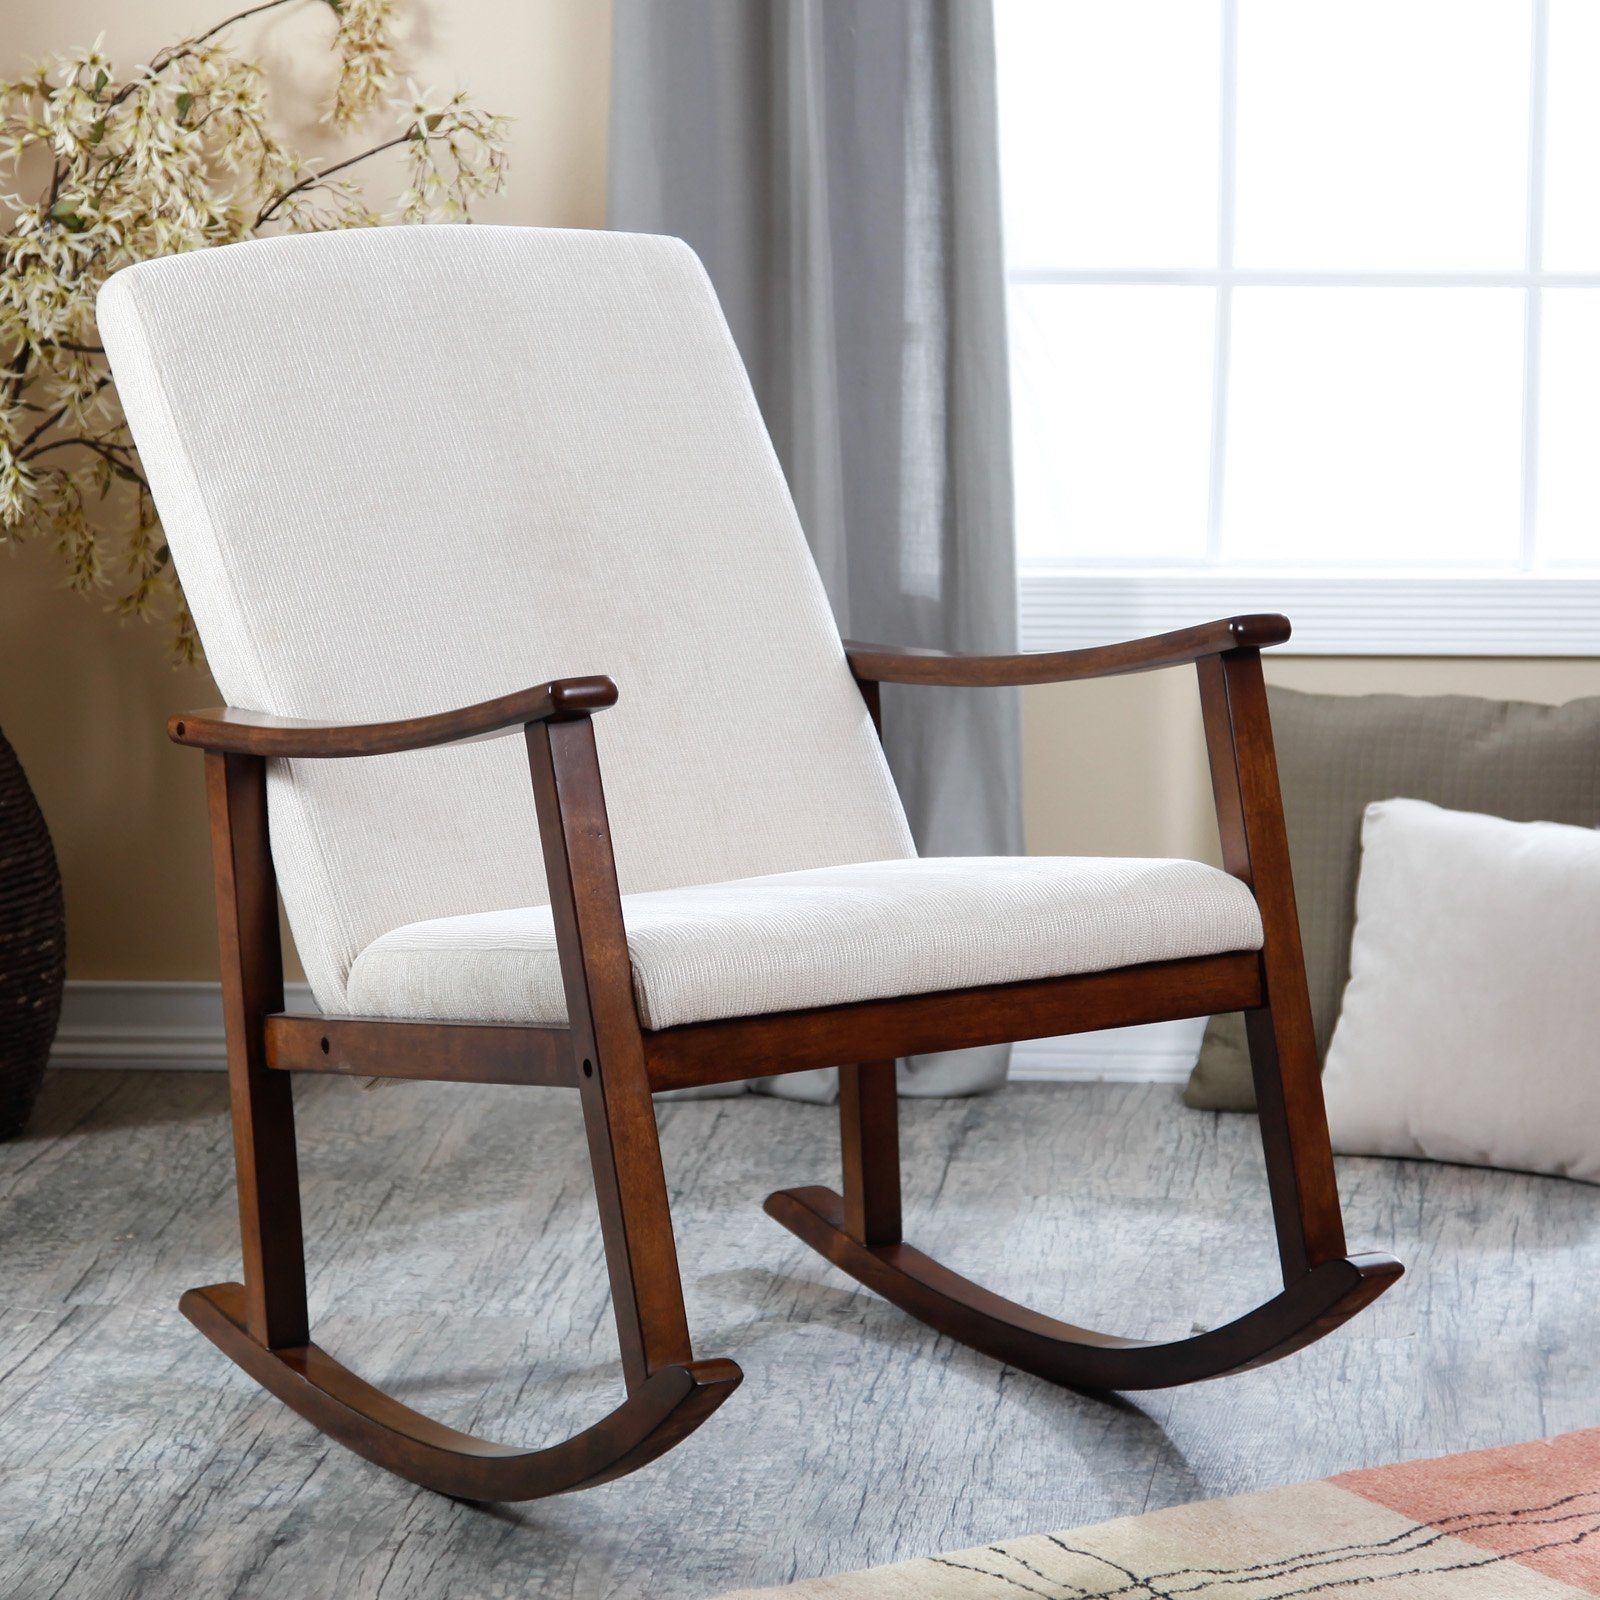 Have To Have It. Belham Living Holden Modern Rocking Chair Intended For Rocking Chairs For Living Room (Photo 10 of 15)